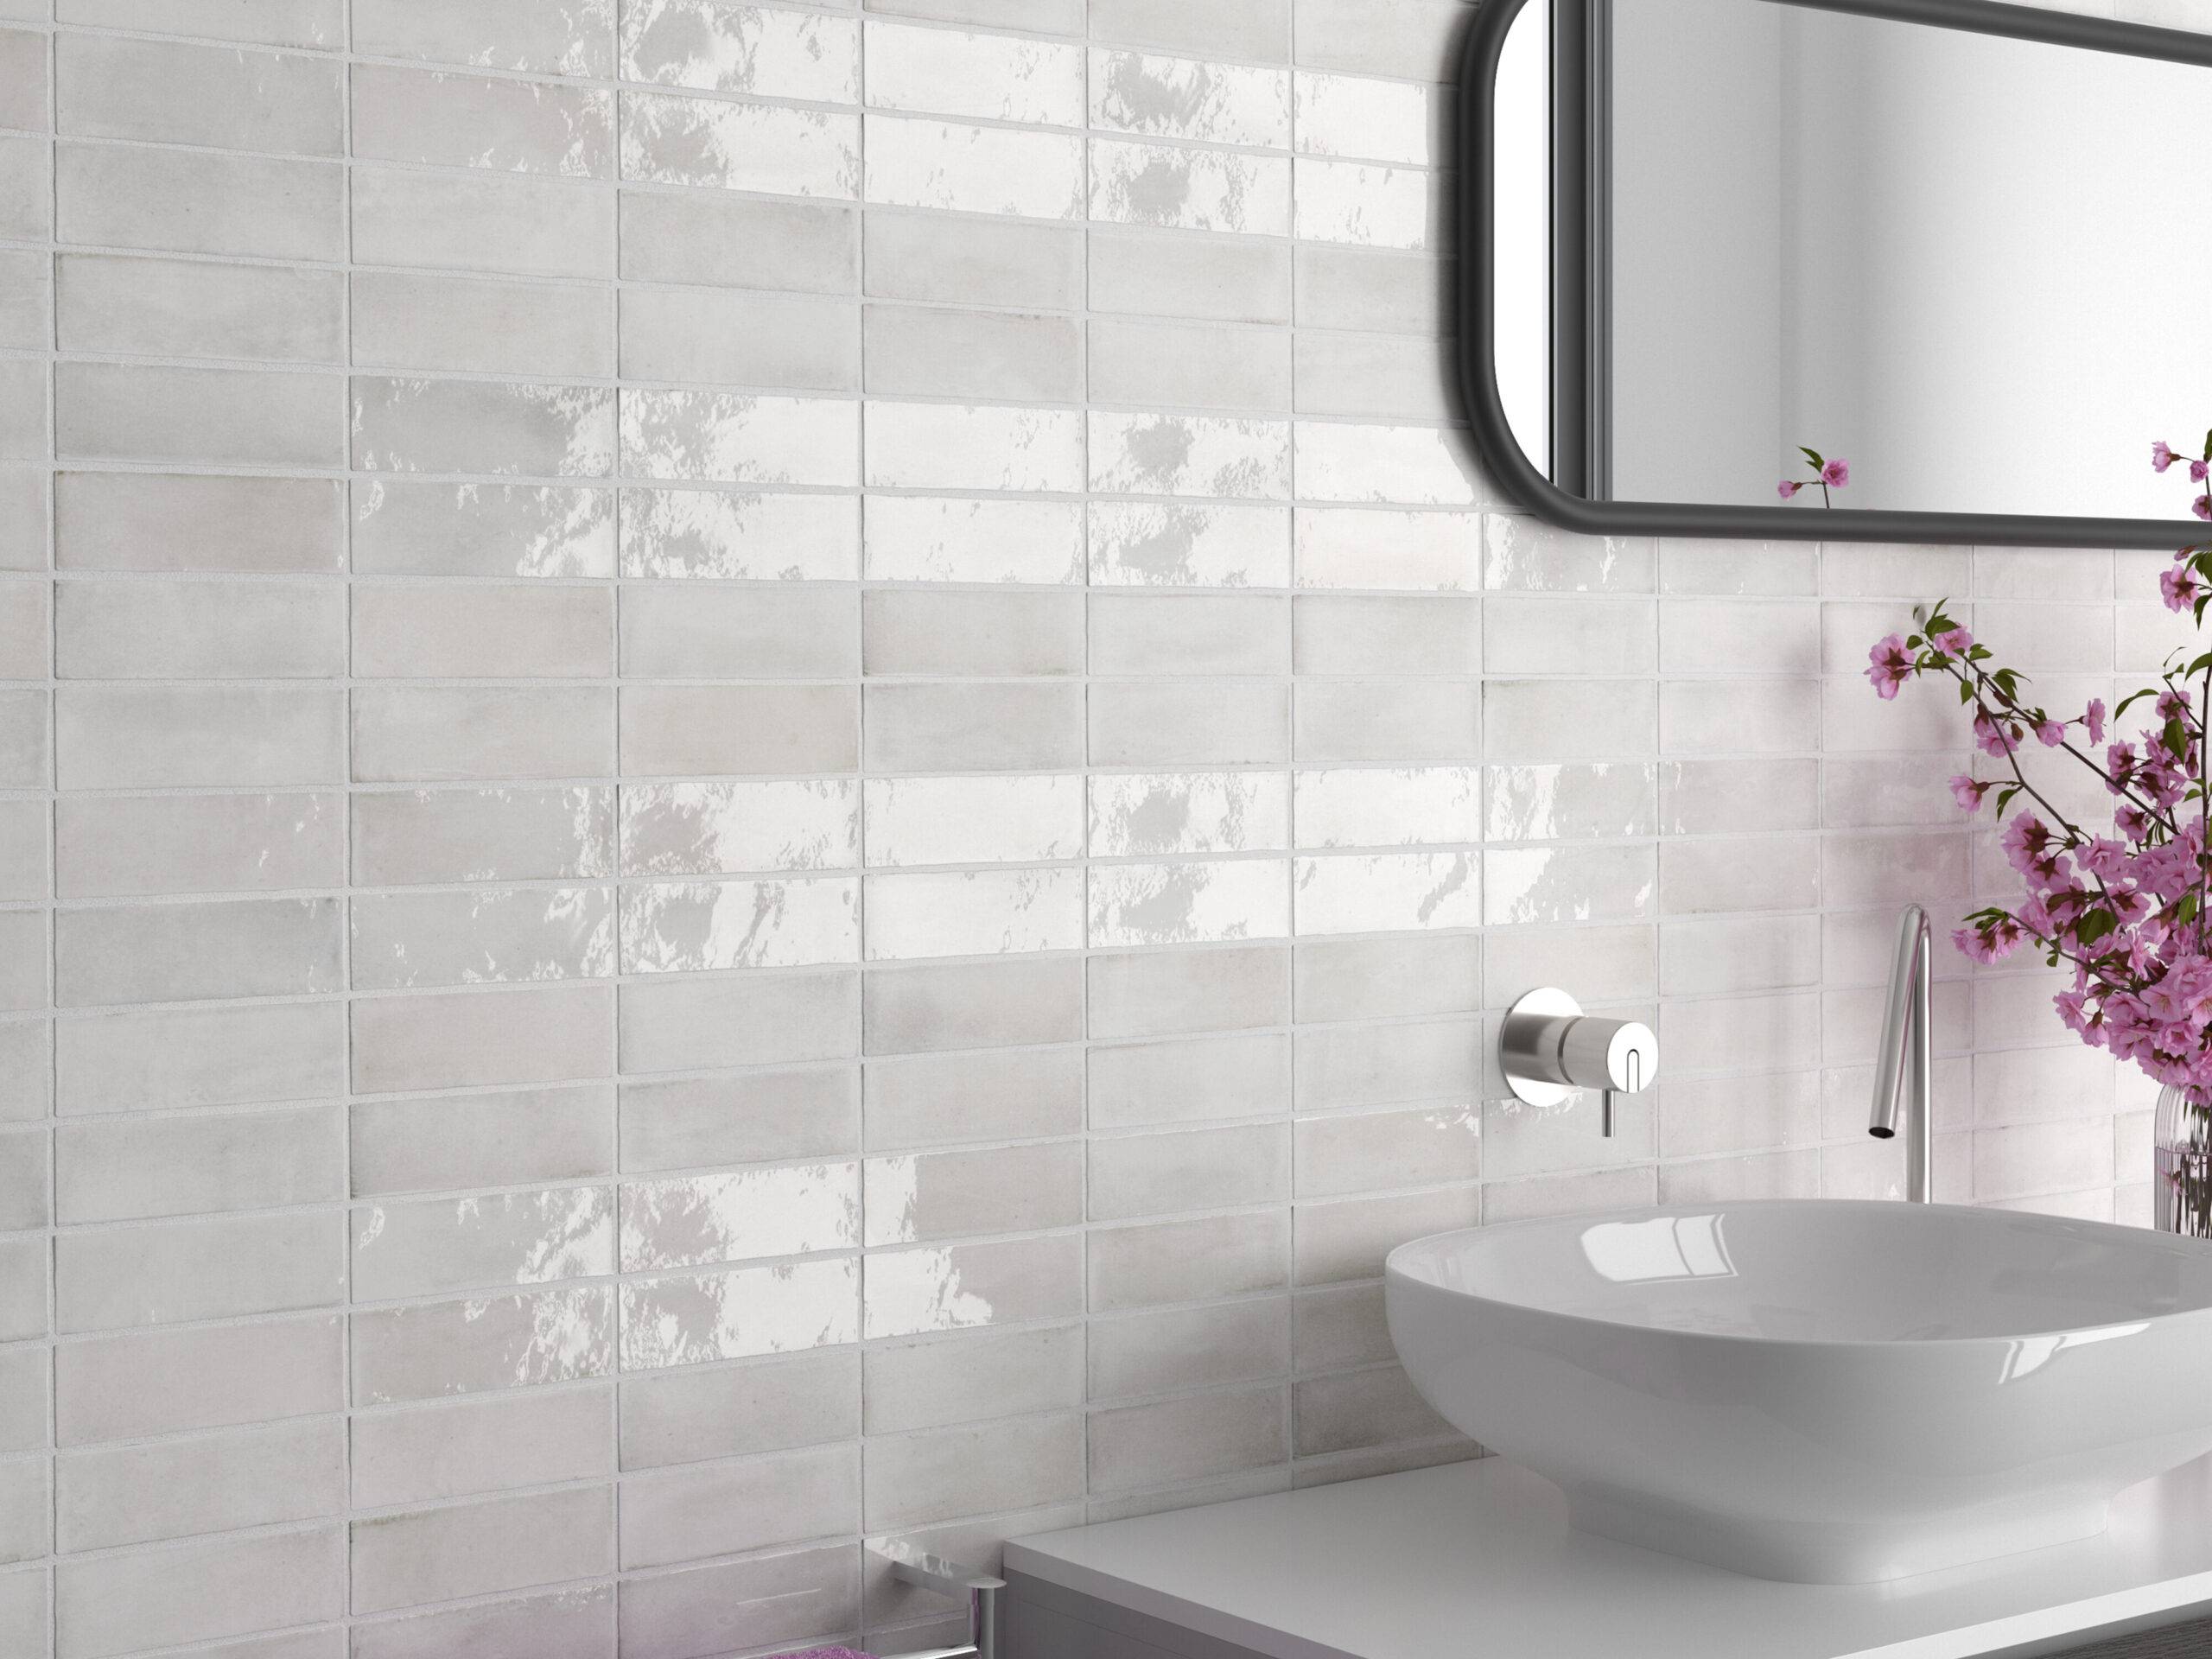 This bright and modern bathroom features handmade-look subway tile in stripes of matte and glossy finish.